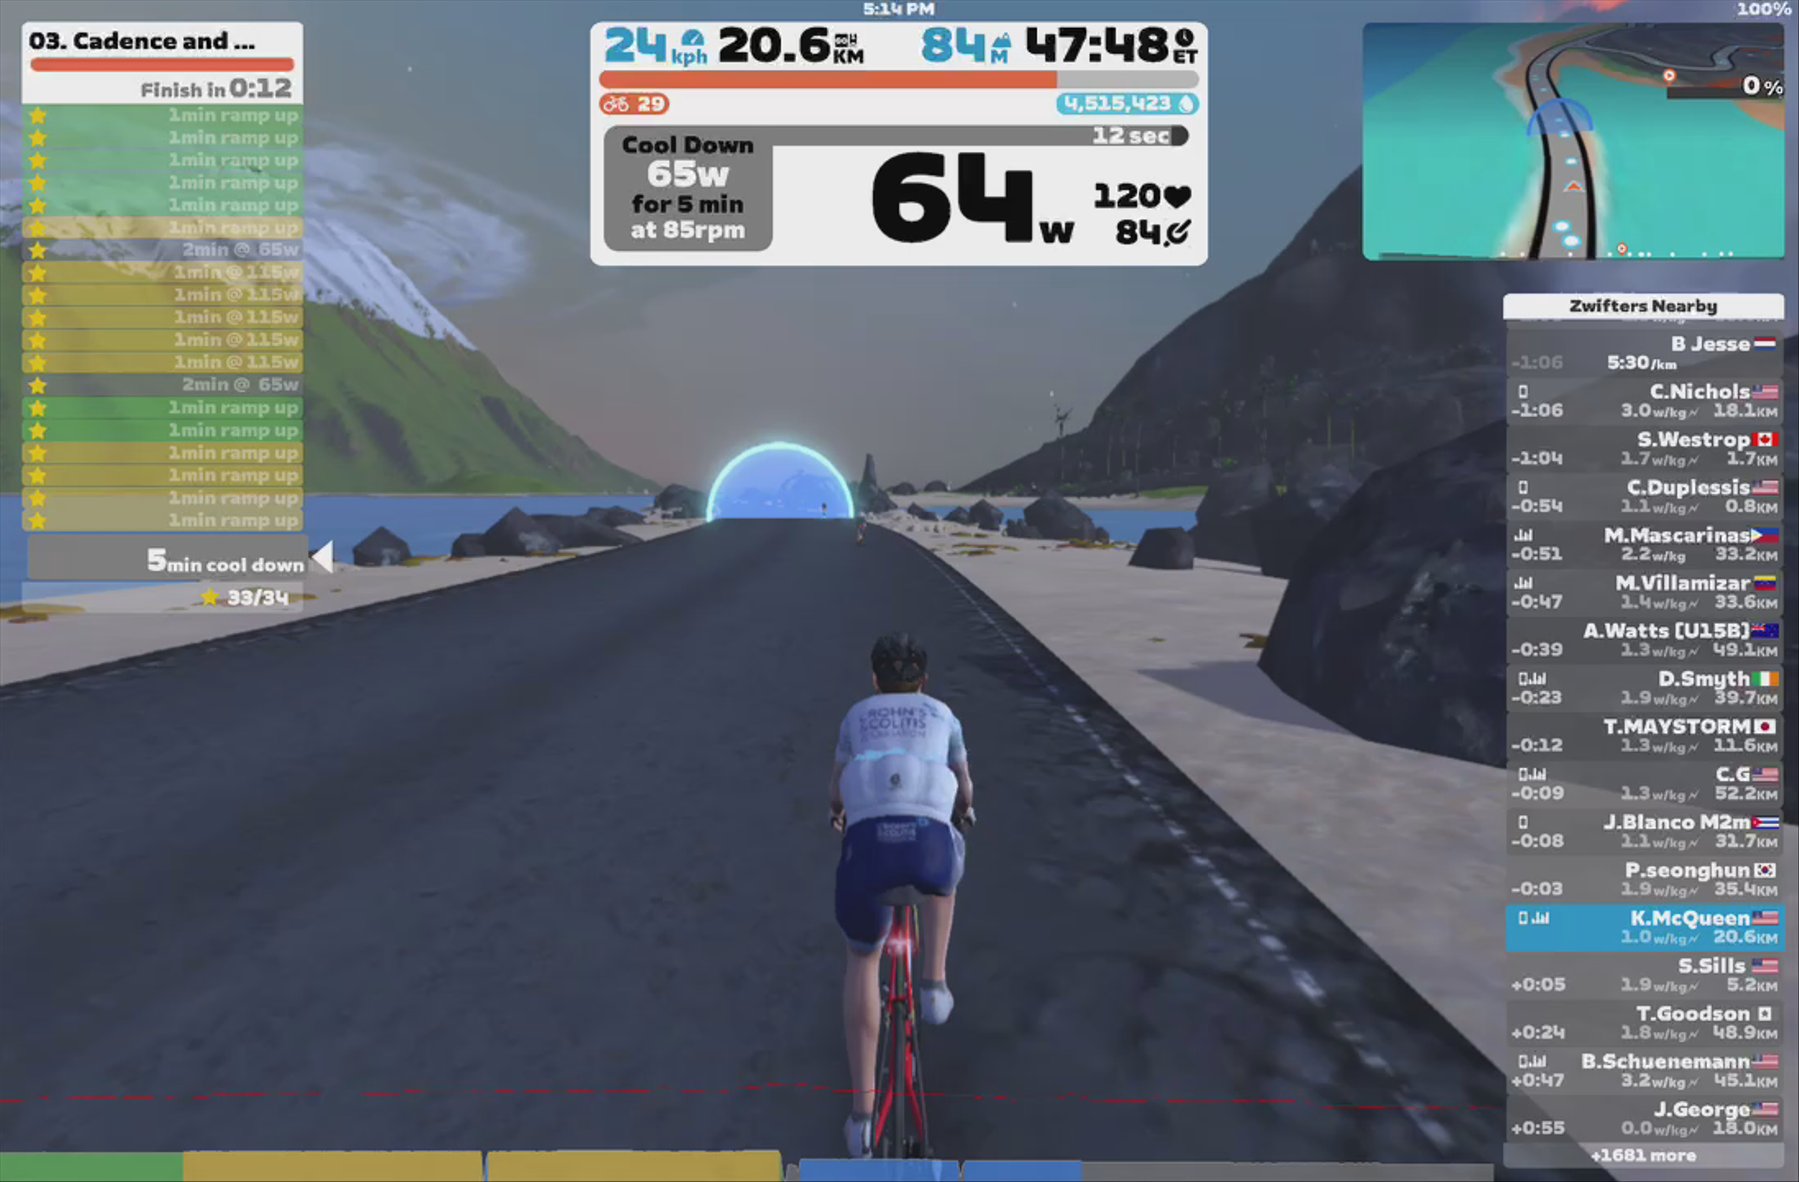 Zwift - 03. Cadence and Cruise in Watopia